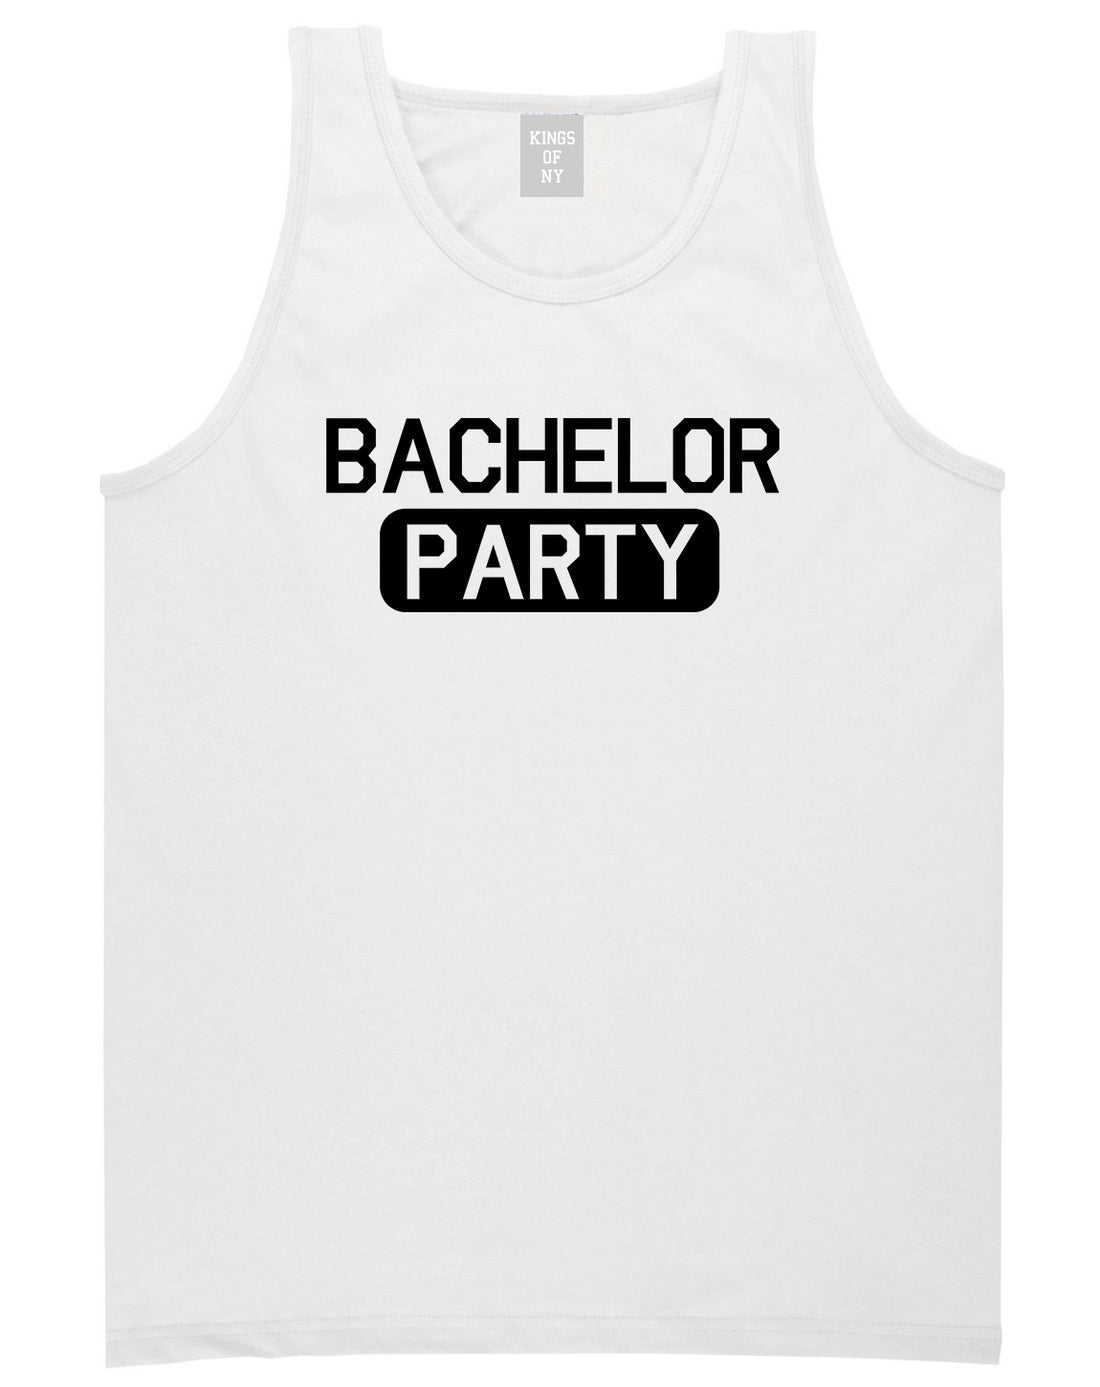 Bachelor Party White Tank Top Shirt by Kings Of NY